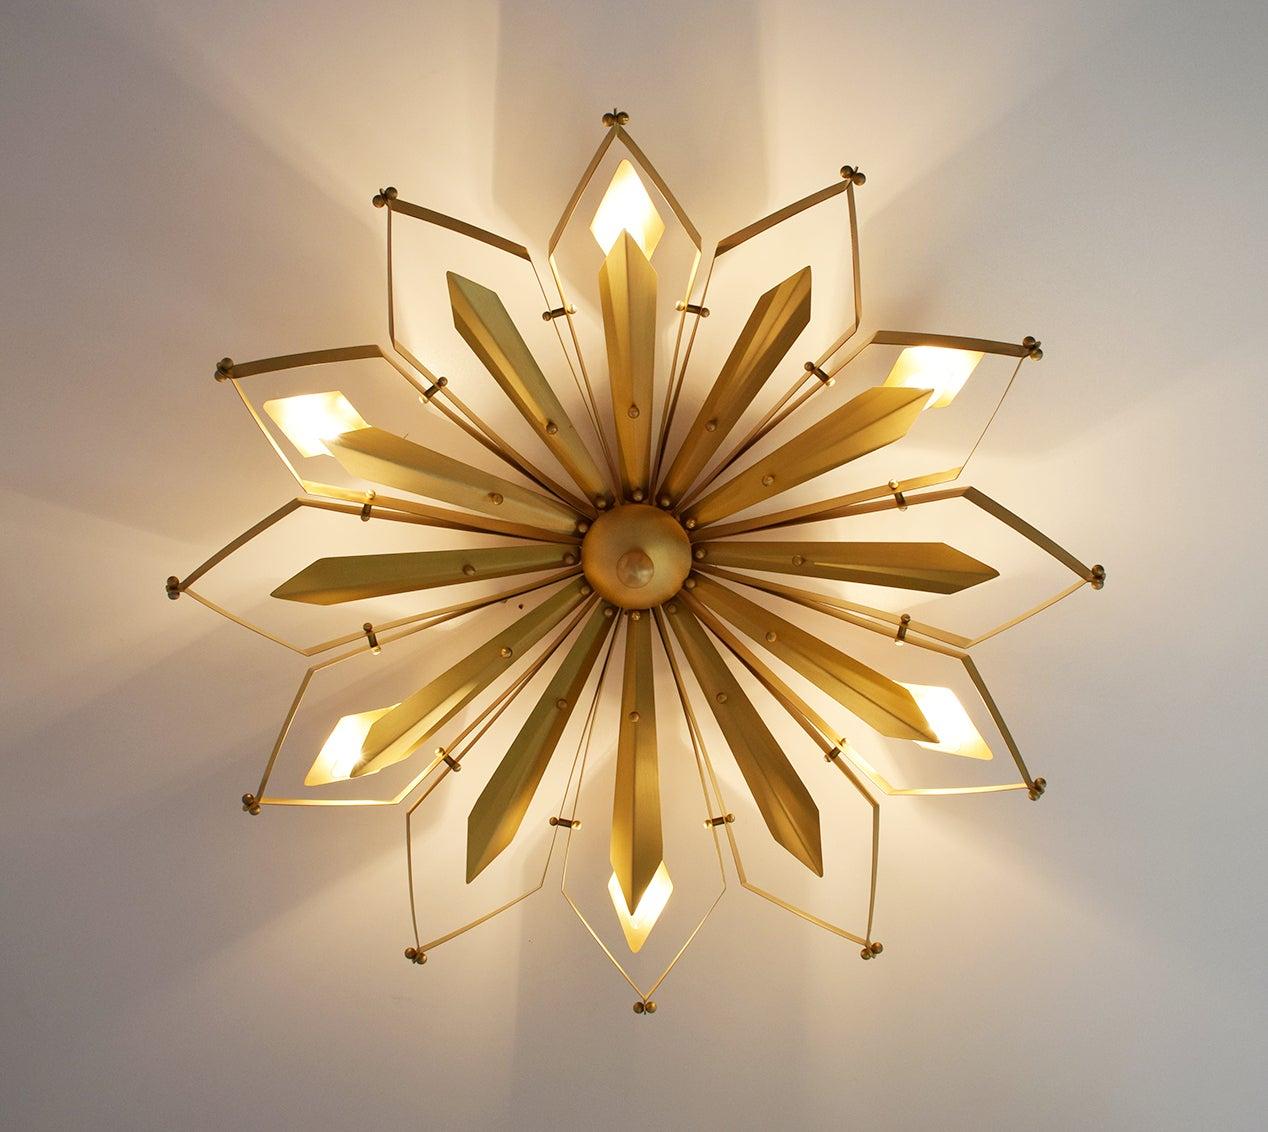 Elegant Italian flushmount with satin brass frame handcrafted to resemble a concave dahlia flower, designed by Fabio Bergomi for Fabio Ltd / Made in Italy
6 lights / E12 or E14 type / max 40W each
Measures: Diameter 37 inches, height 9 inches
Order